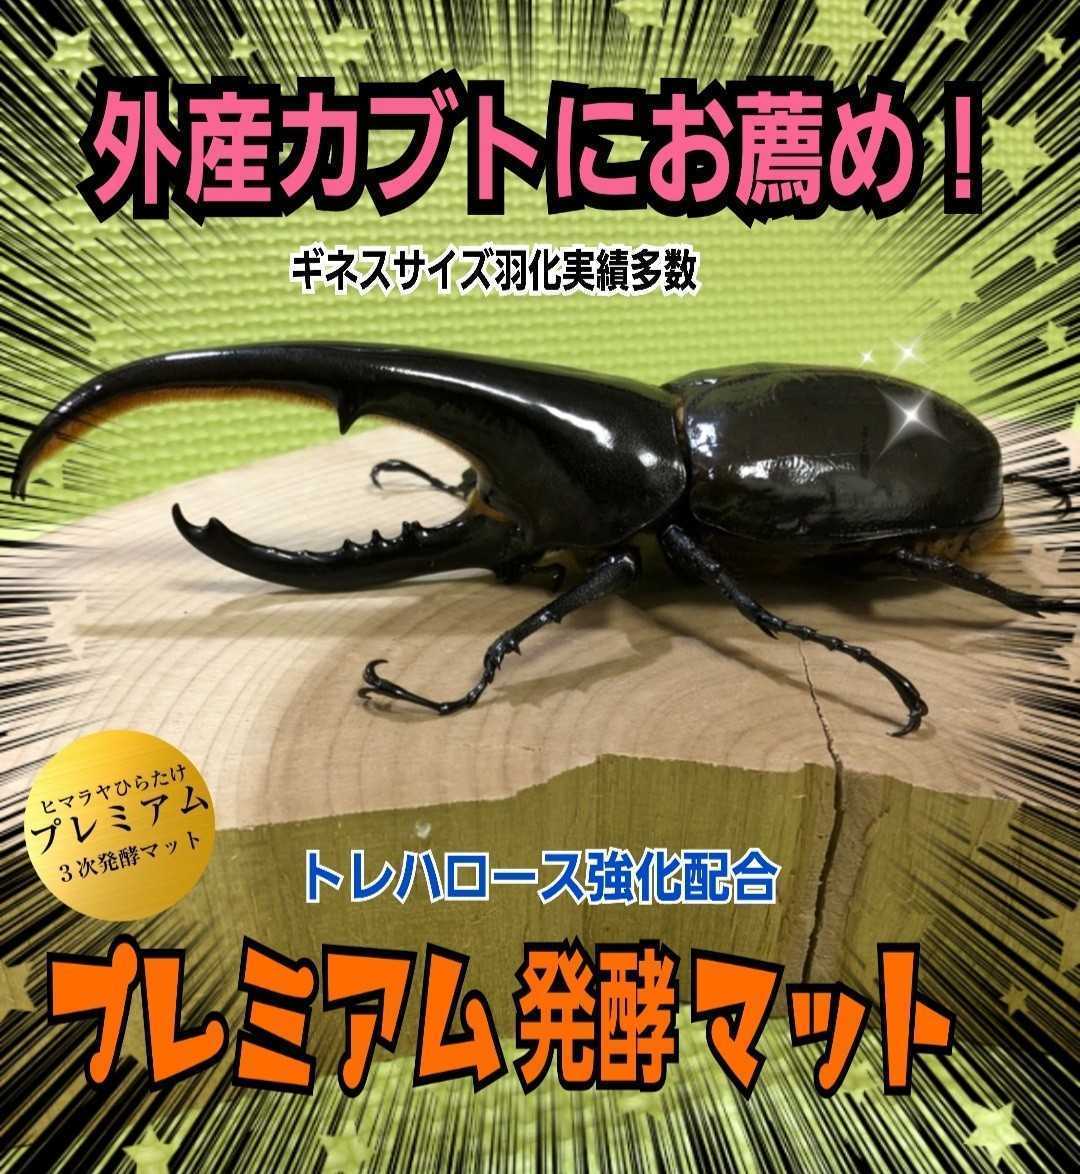  evolved! premium 3 next departure . rhinoceros beetle mat [20L] special amino acid etc. nutrition addition agent .3 times combination!tore Hello s* royal jelly strengthen! production egg also 